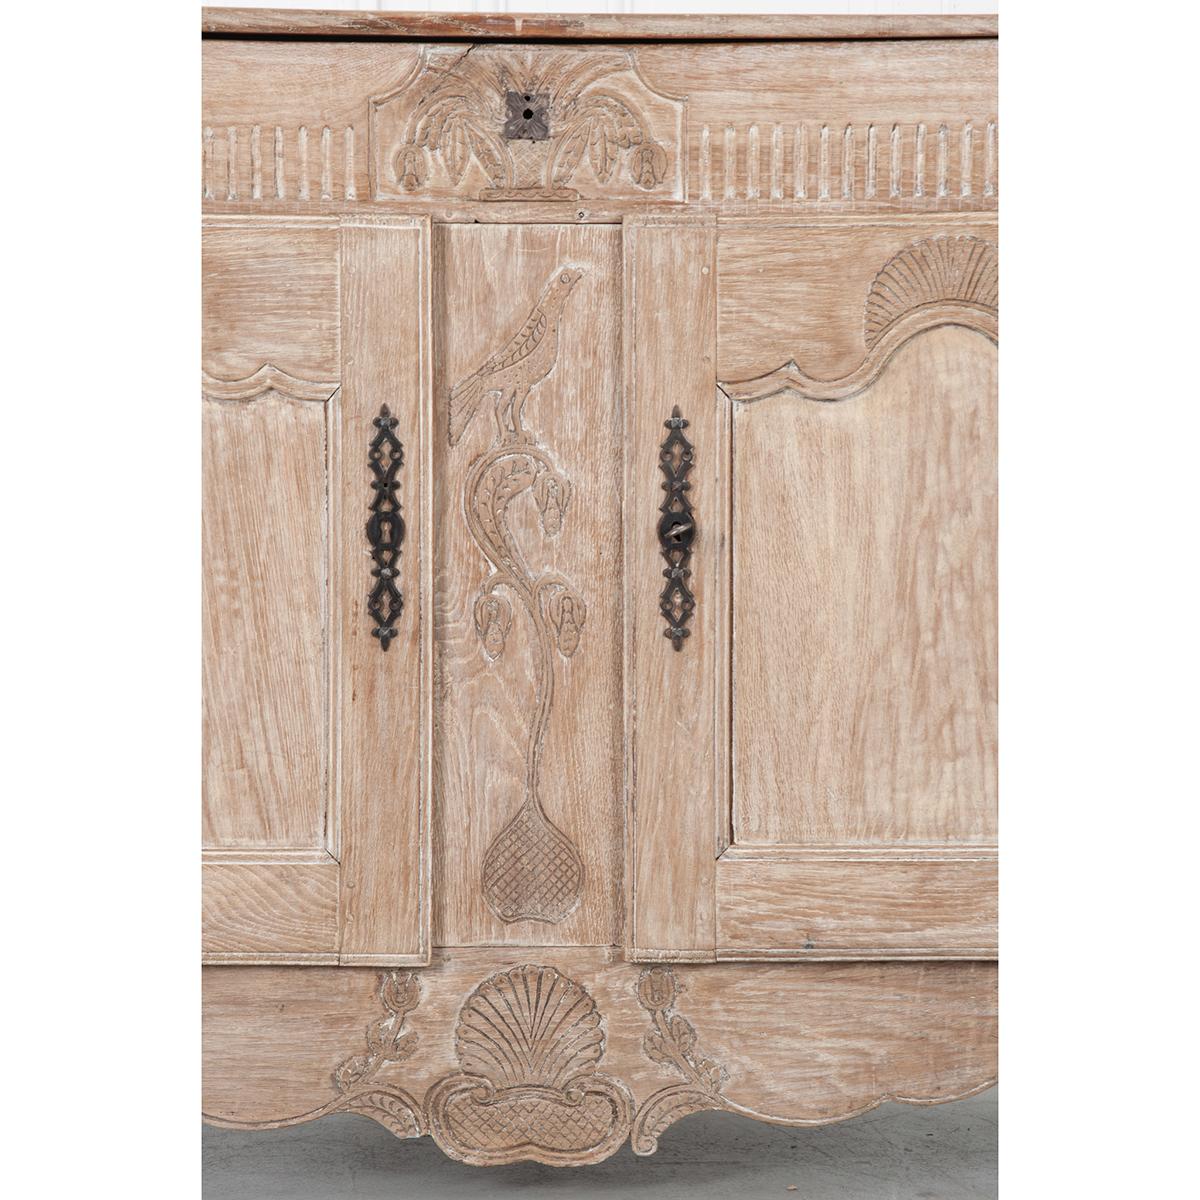 Delight in the detail of this gorgeous buffet! The light pickle-finished wood accentuates the unique carvings and gives the piece an organic essence. The top of this buffet hinges open to reveal an open cavity for storage rather than a drawer. The